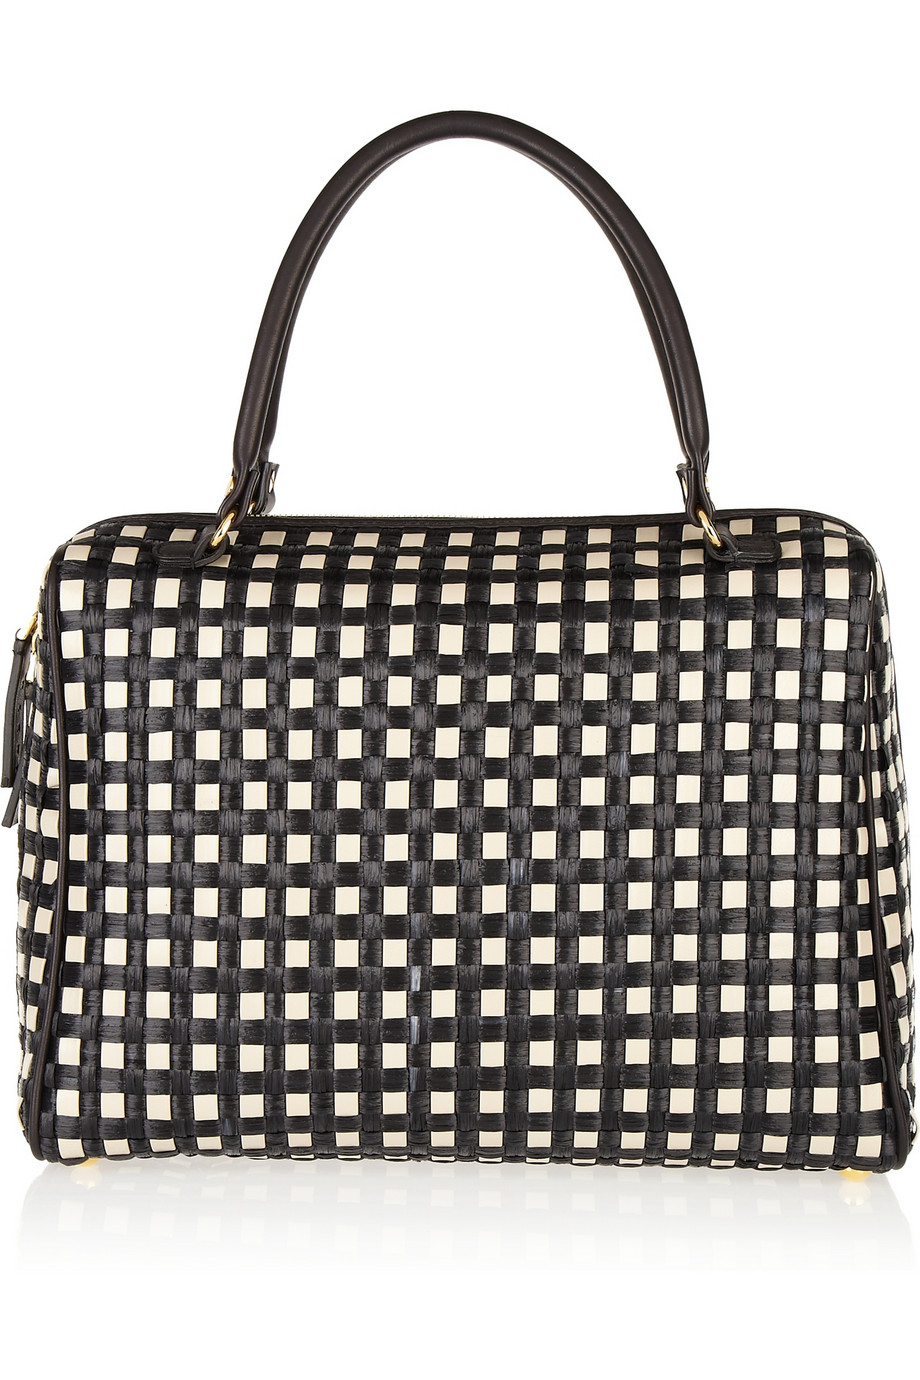 Marni Woven Leather and Raffia Bowling Bag: The Whimsical Weave